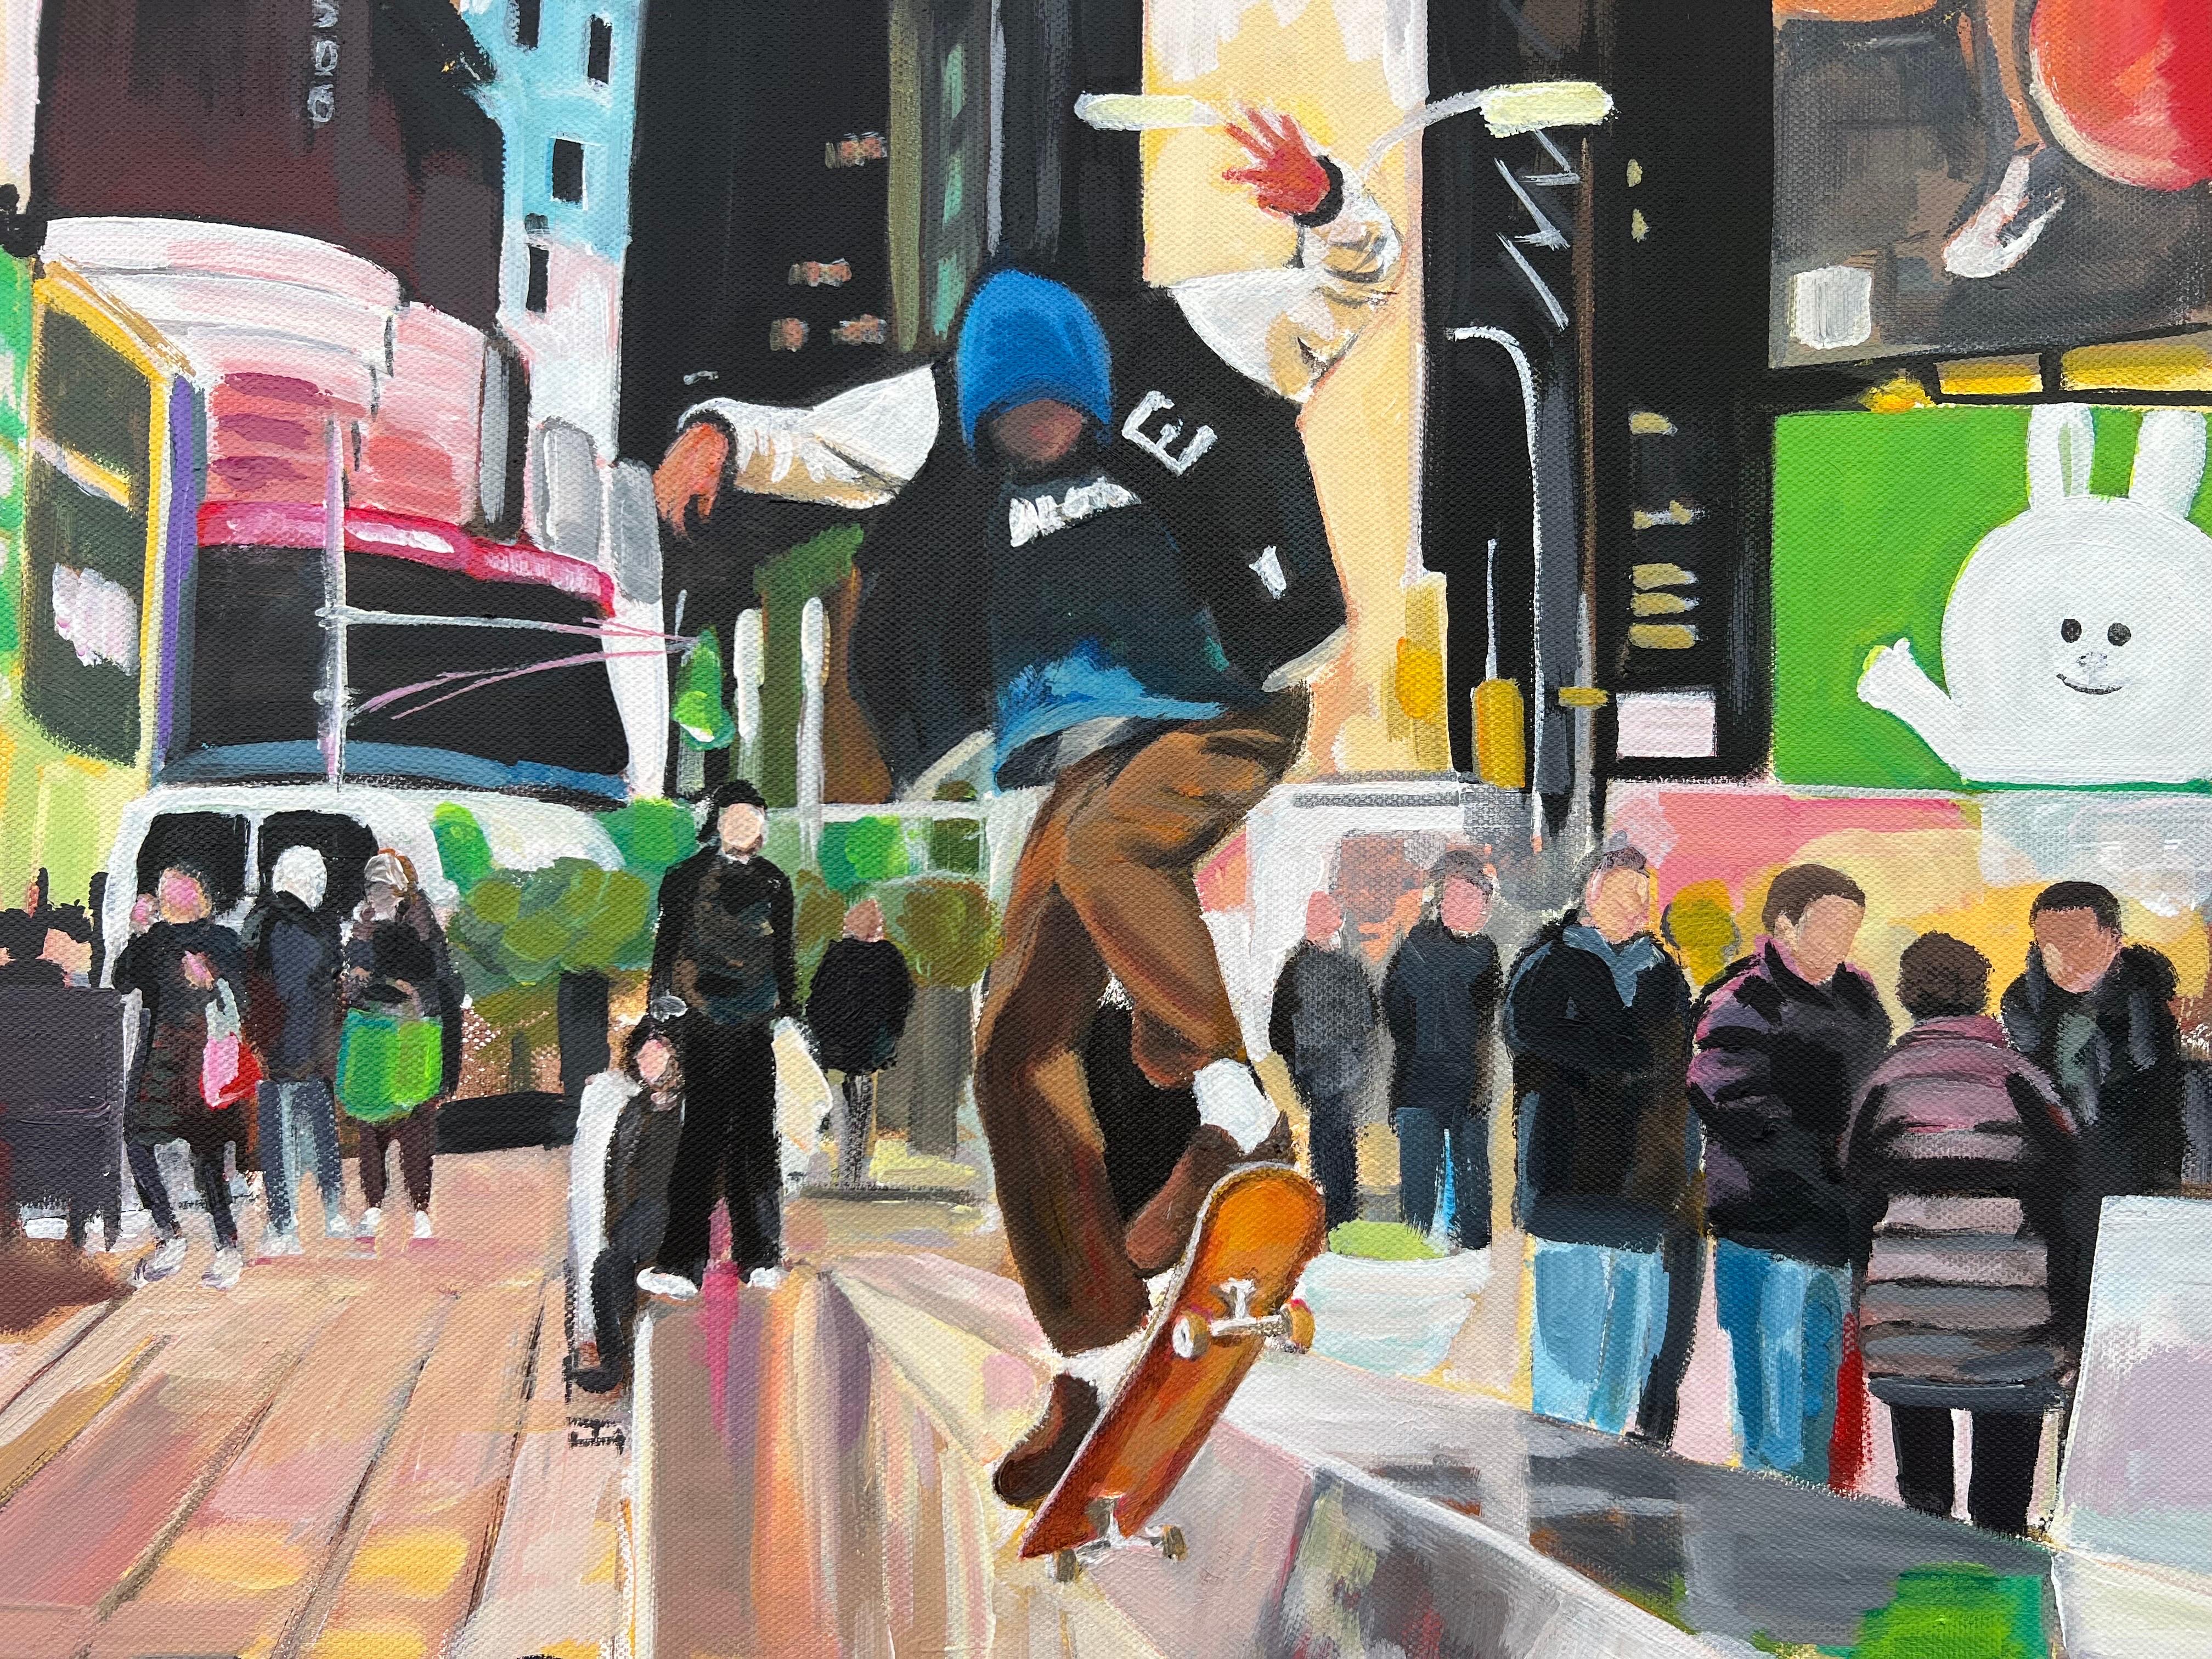 Skate Boarder Times Square New York City after the Rain by British Urban Artist - Contemporary Painting by Angela Wakefield